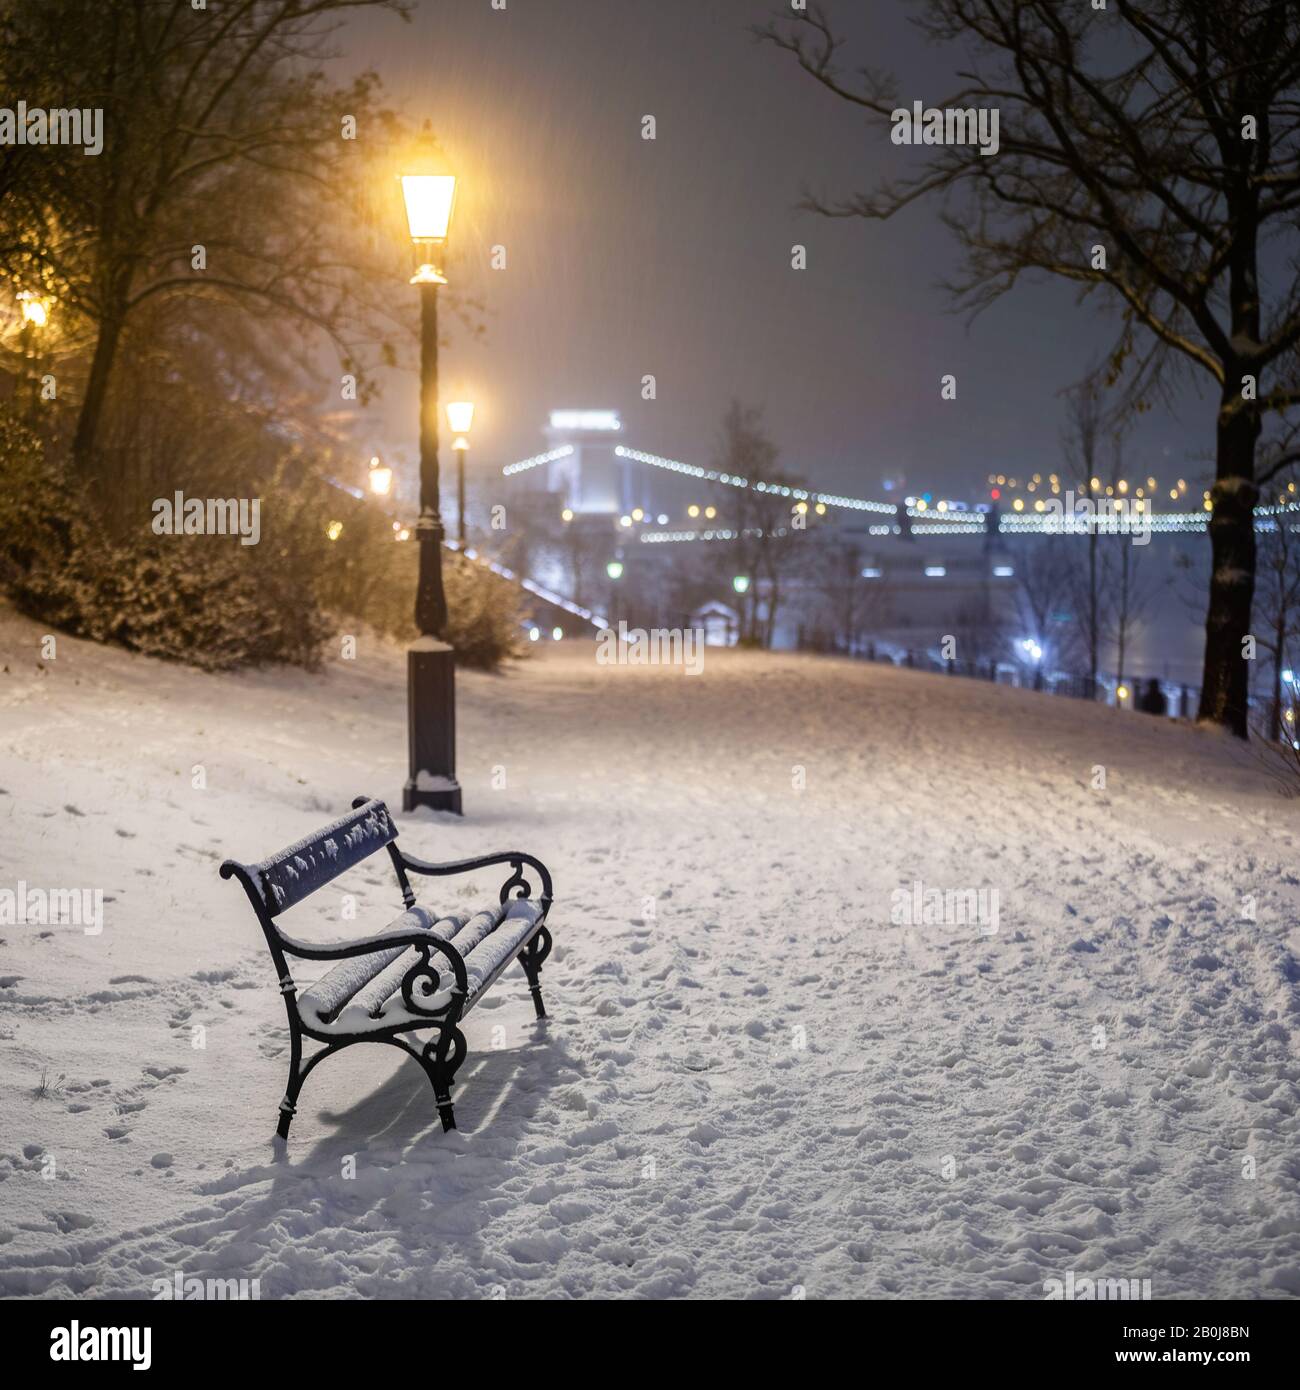 Budapest, Hungary - Bench and lamp post in a snowy park at Buda district with Szechenyi Chain Bridge at background during heavy snowing at winter time Stock Photo